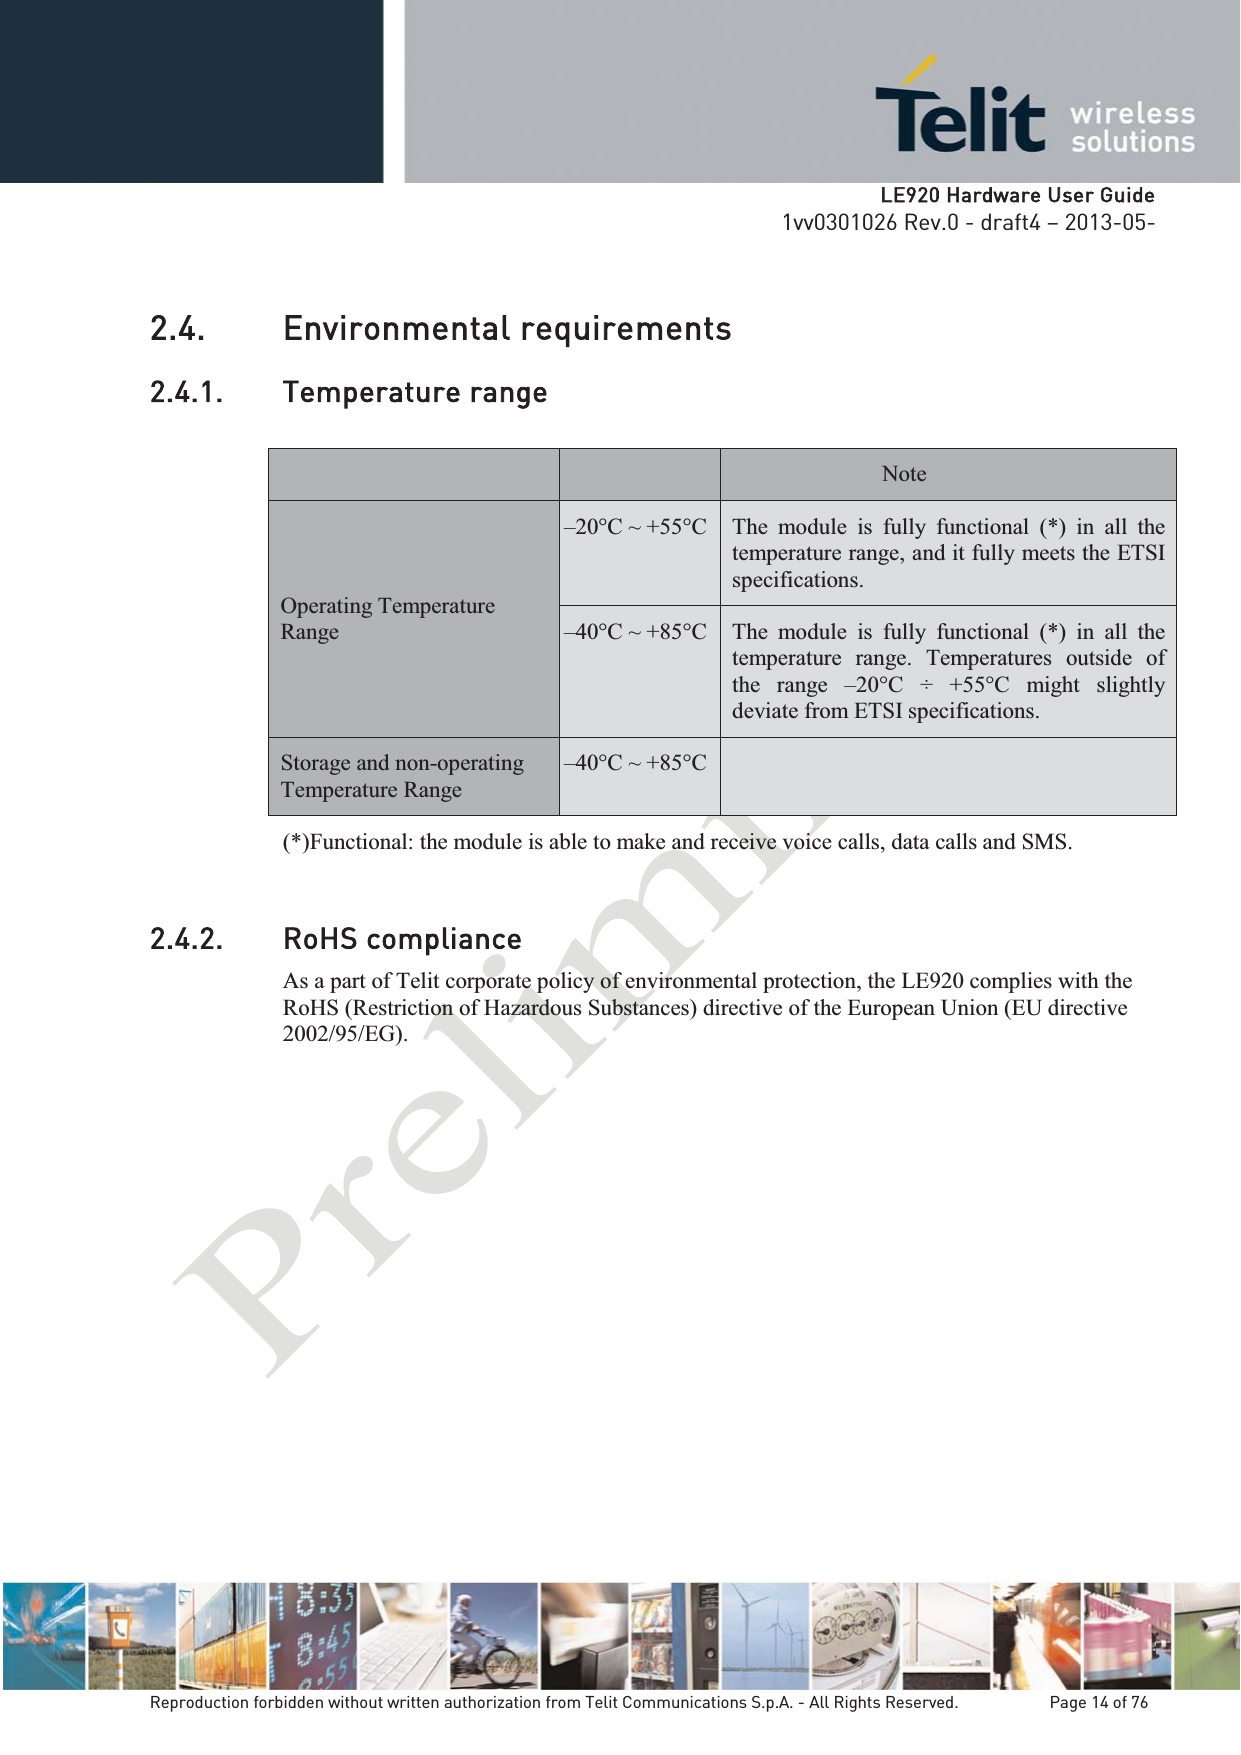   LLE920 Hardware User Guide1vv0301026 Rev.0 - draft4 – 2013-05-Reproduction forbidden without written authorization from Telit Communications S.p.A. - All Rights Reserved.    Page 14 of 76 2.4. Environmental requirements 2.4.1. Temperature range Note Operating Temperature Range –20°C ~ +55°C  The module is fully functional (*) in all the temperature range, and it fully meets the ETSI specifications. –40°C ~ +85°C  The module is fully functional (*) in all the temperature range. Temperatures outside of the range –20°C ÷ +55°C might slightly deviate from ETSI specifications. Storage and non-operating Temperature Range –40°C ~ +85°C   (*)Functional: the module is able to make and receive voice calls, data calls and SMS.  2.4.2. RoHS compliance As a part of Telit corporate policy of environmental protection, the LE920 complies with the RoHS (Restriction of Hazardous Substances) directive of the European Union (EU directive 2002/95/EG). 